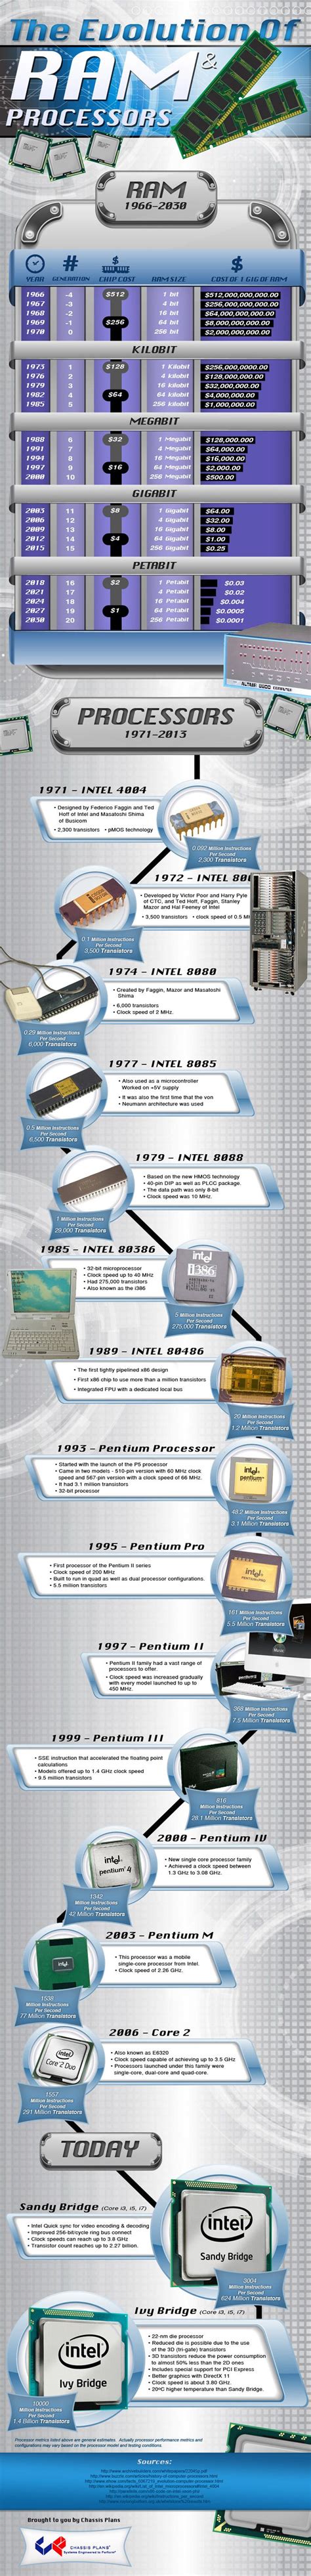 Generally, memory/storage is classified into 2 categories: The Evolution of Ram & Processors | Computer technology ...